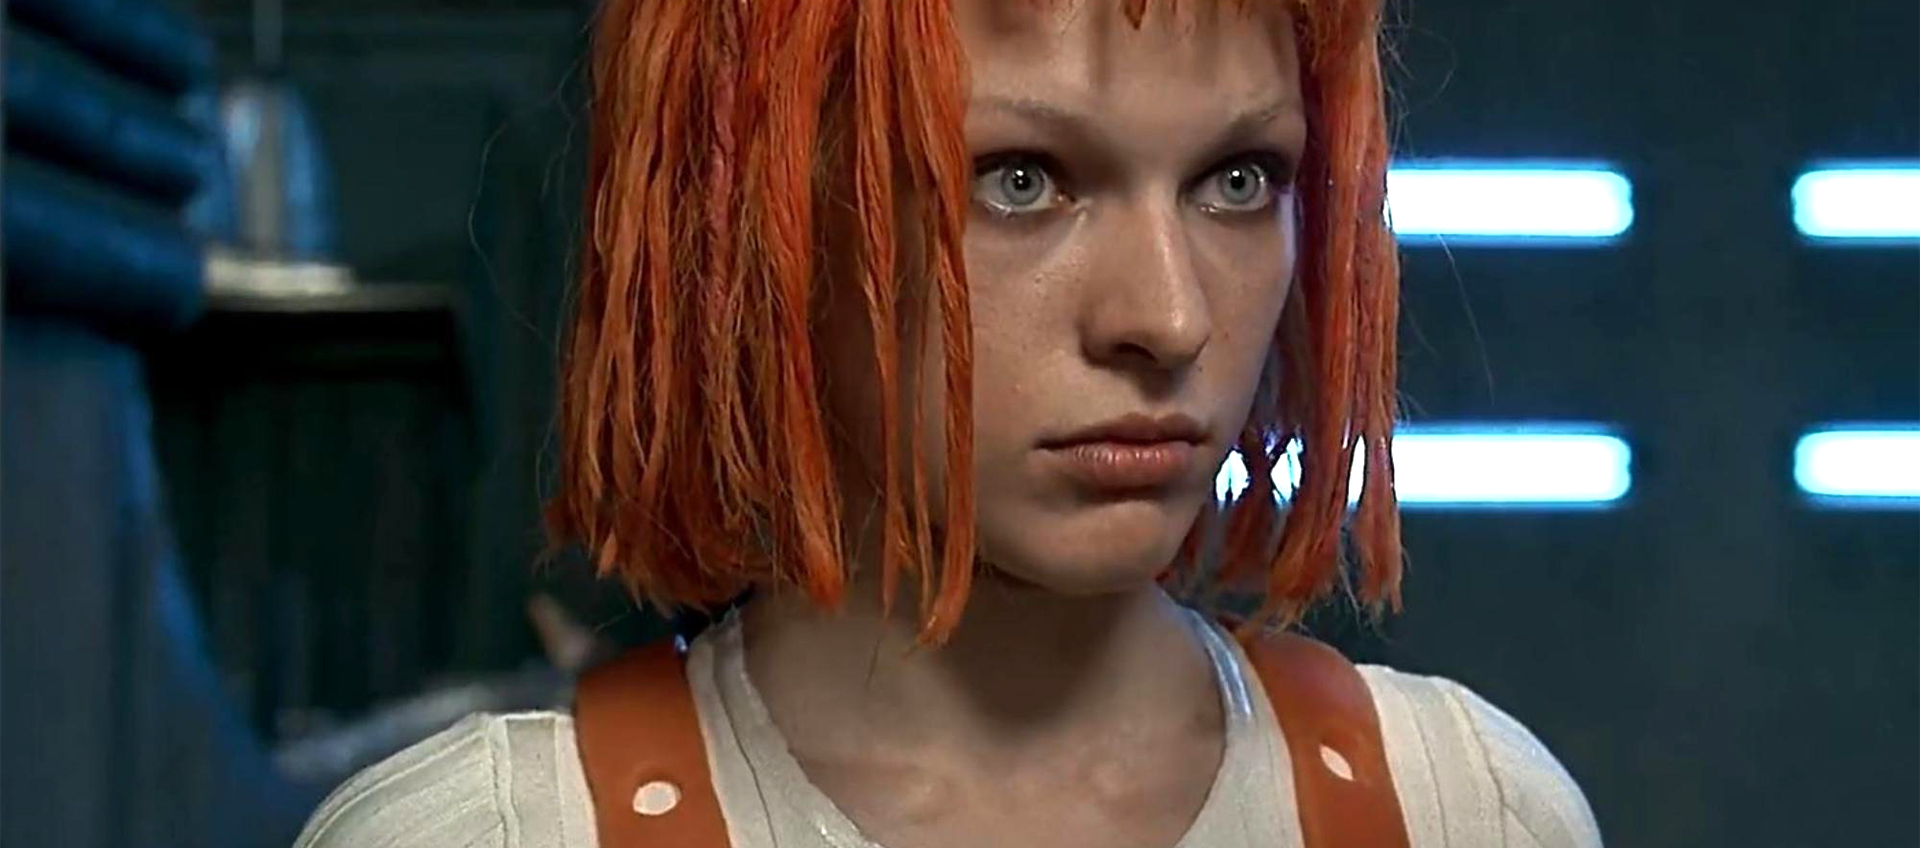 the fifth element full movie hd free